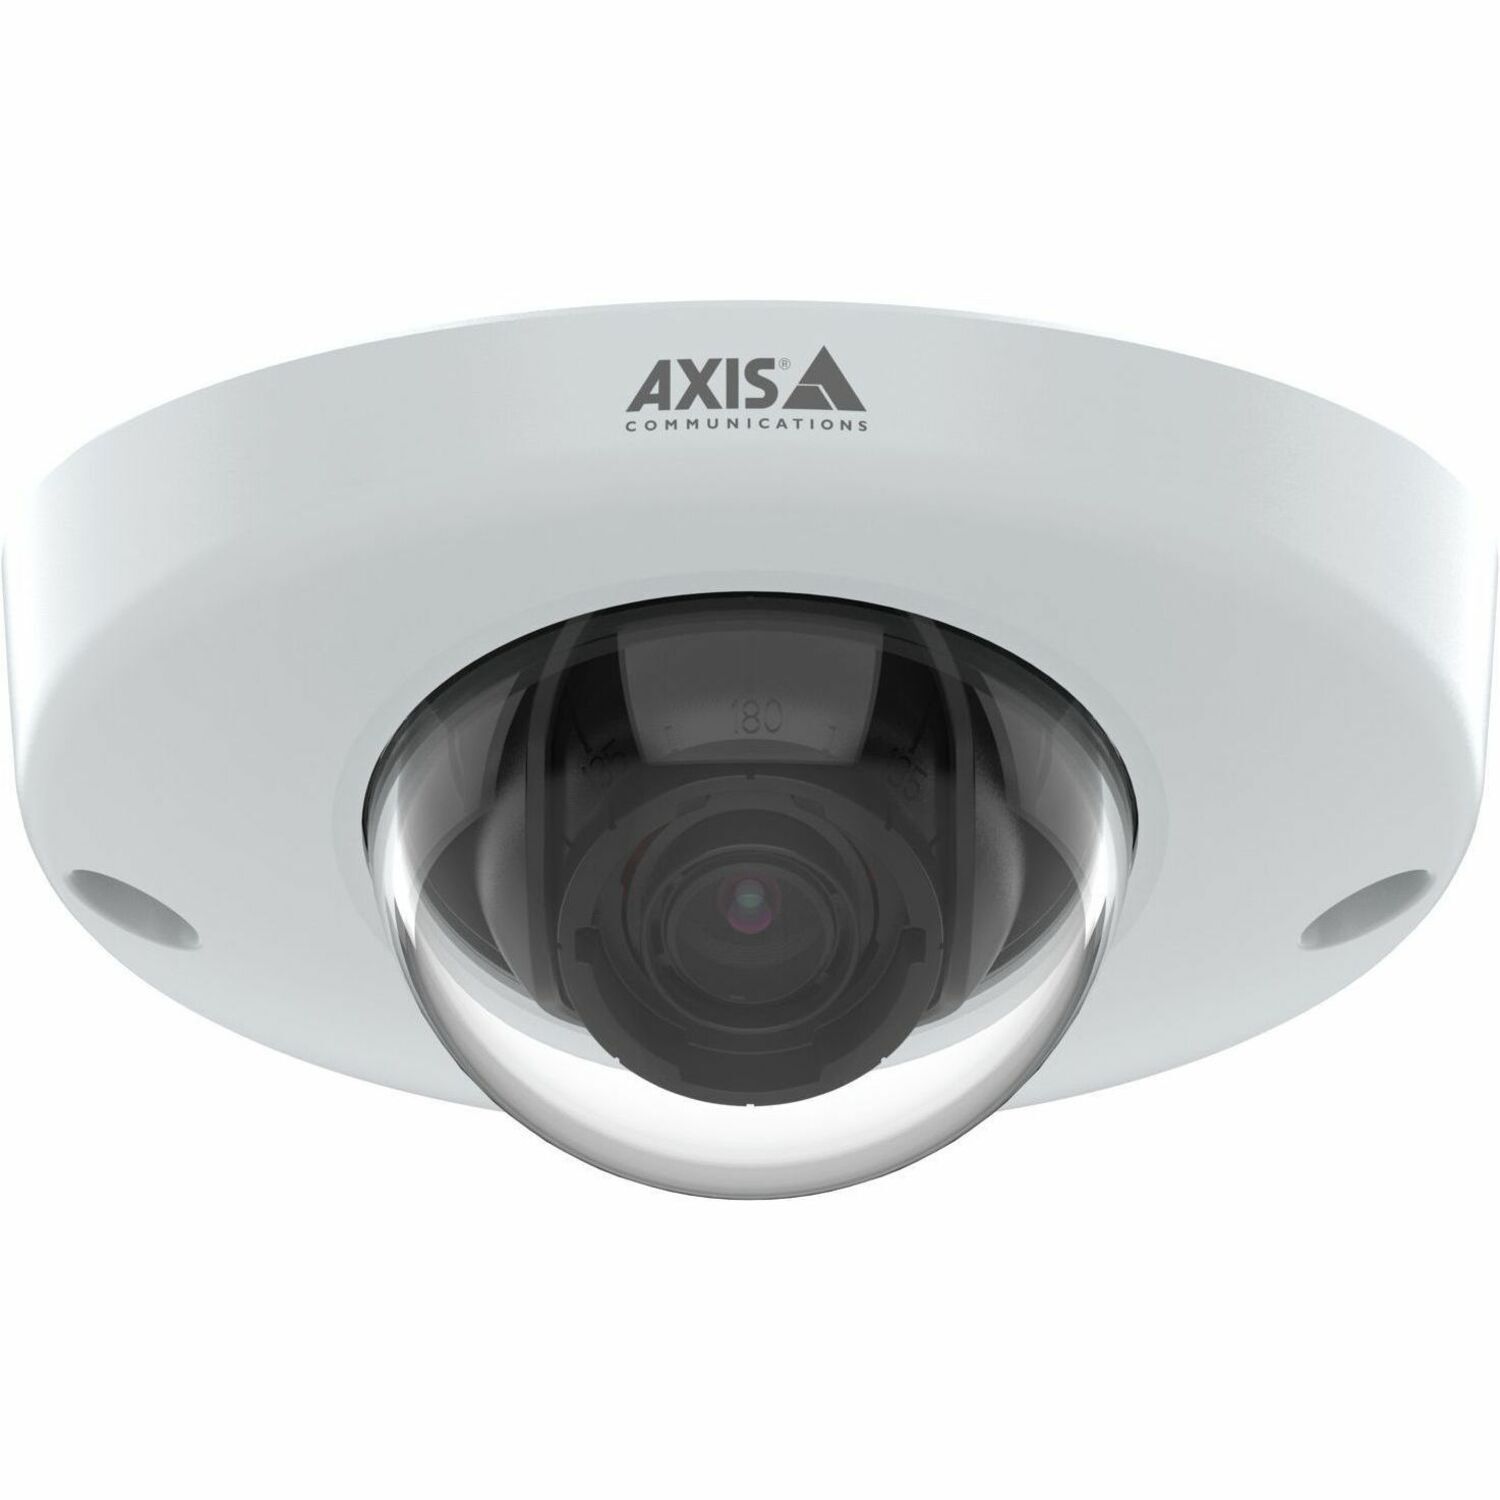 AXIS WizMind M3905-R 2 Megapixel Outdoor Full HD Network Camera ...